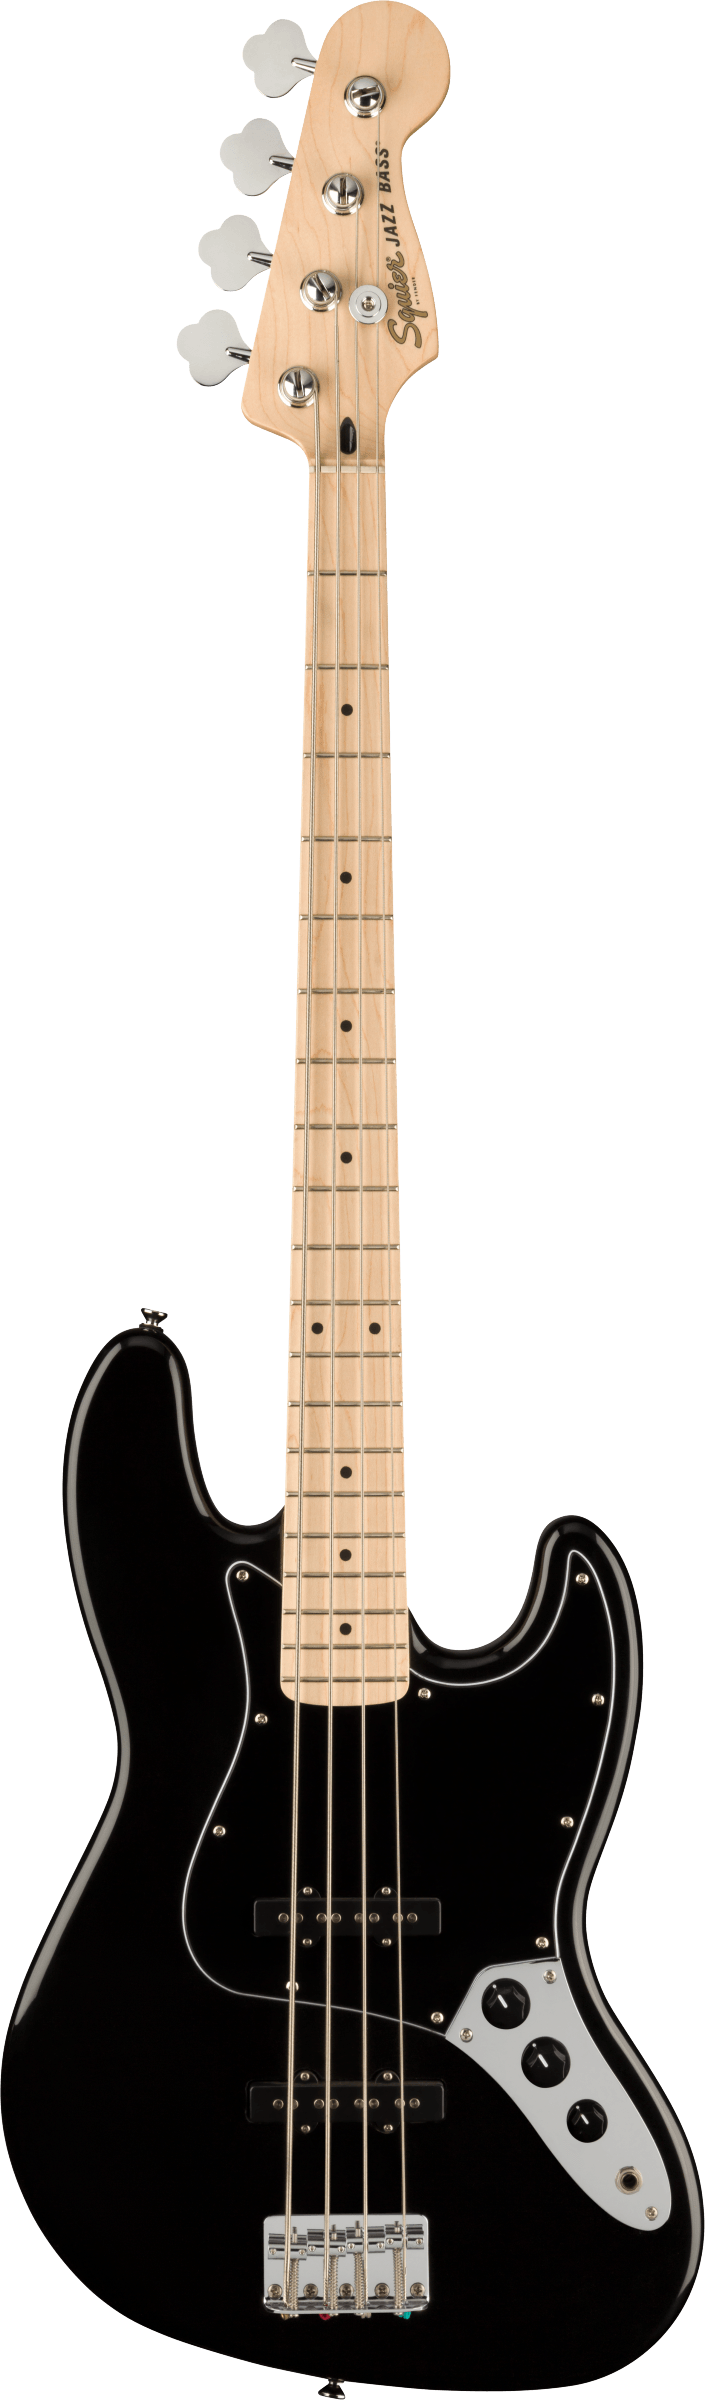 Squier Affinity Jazz Bass in Black with Maple Fingerboard